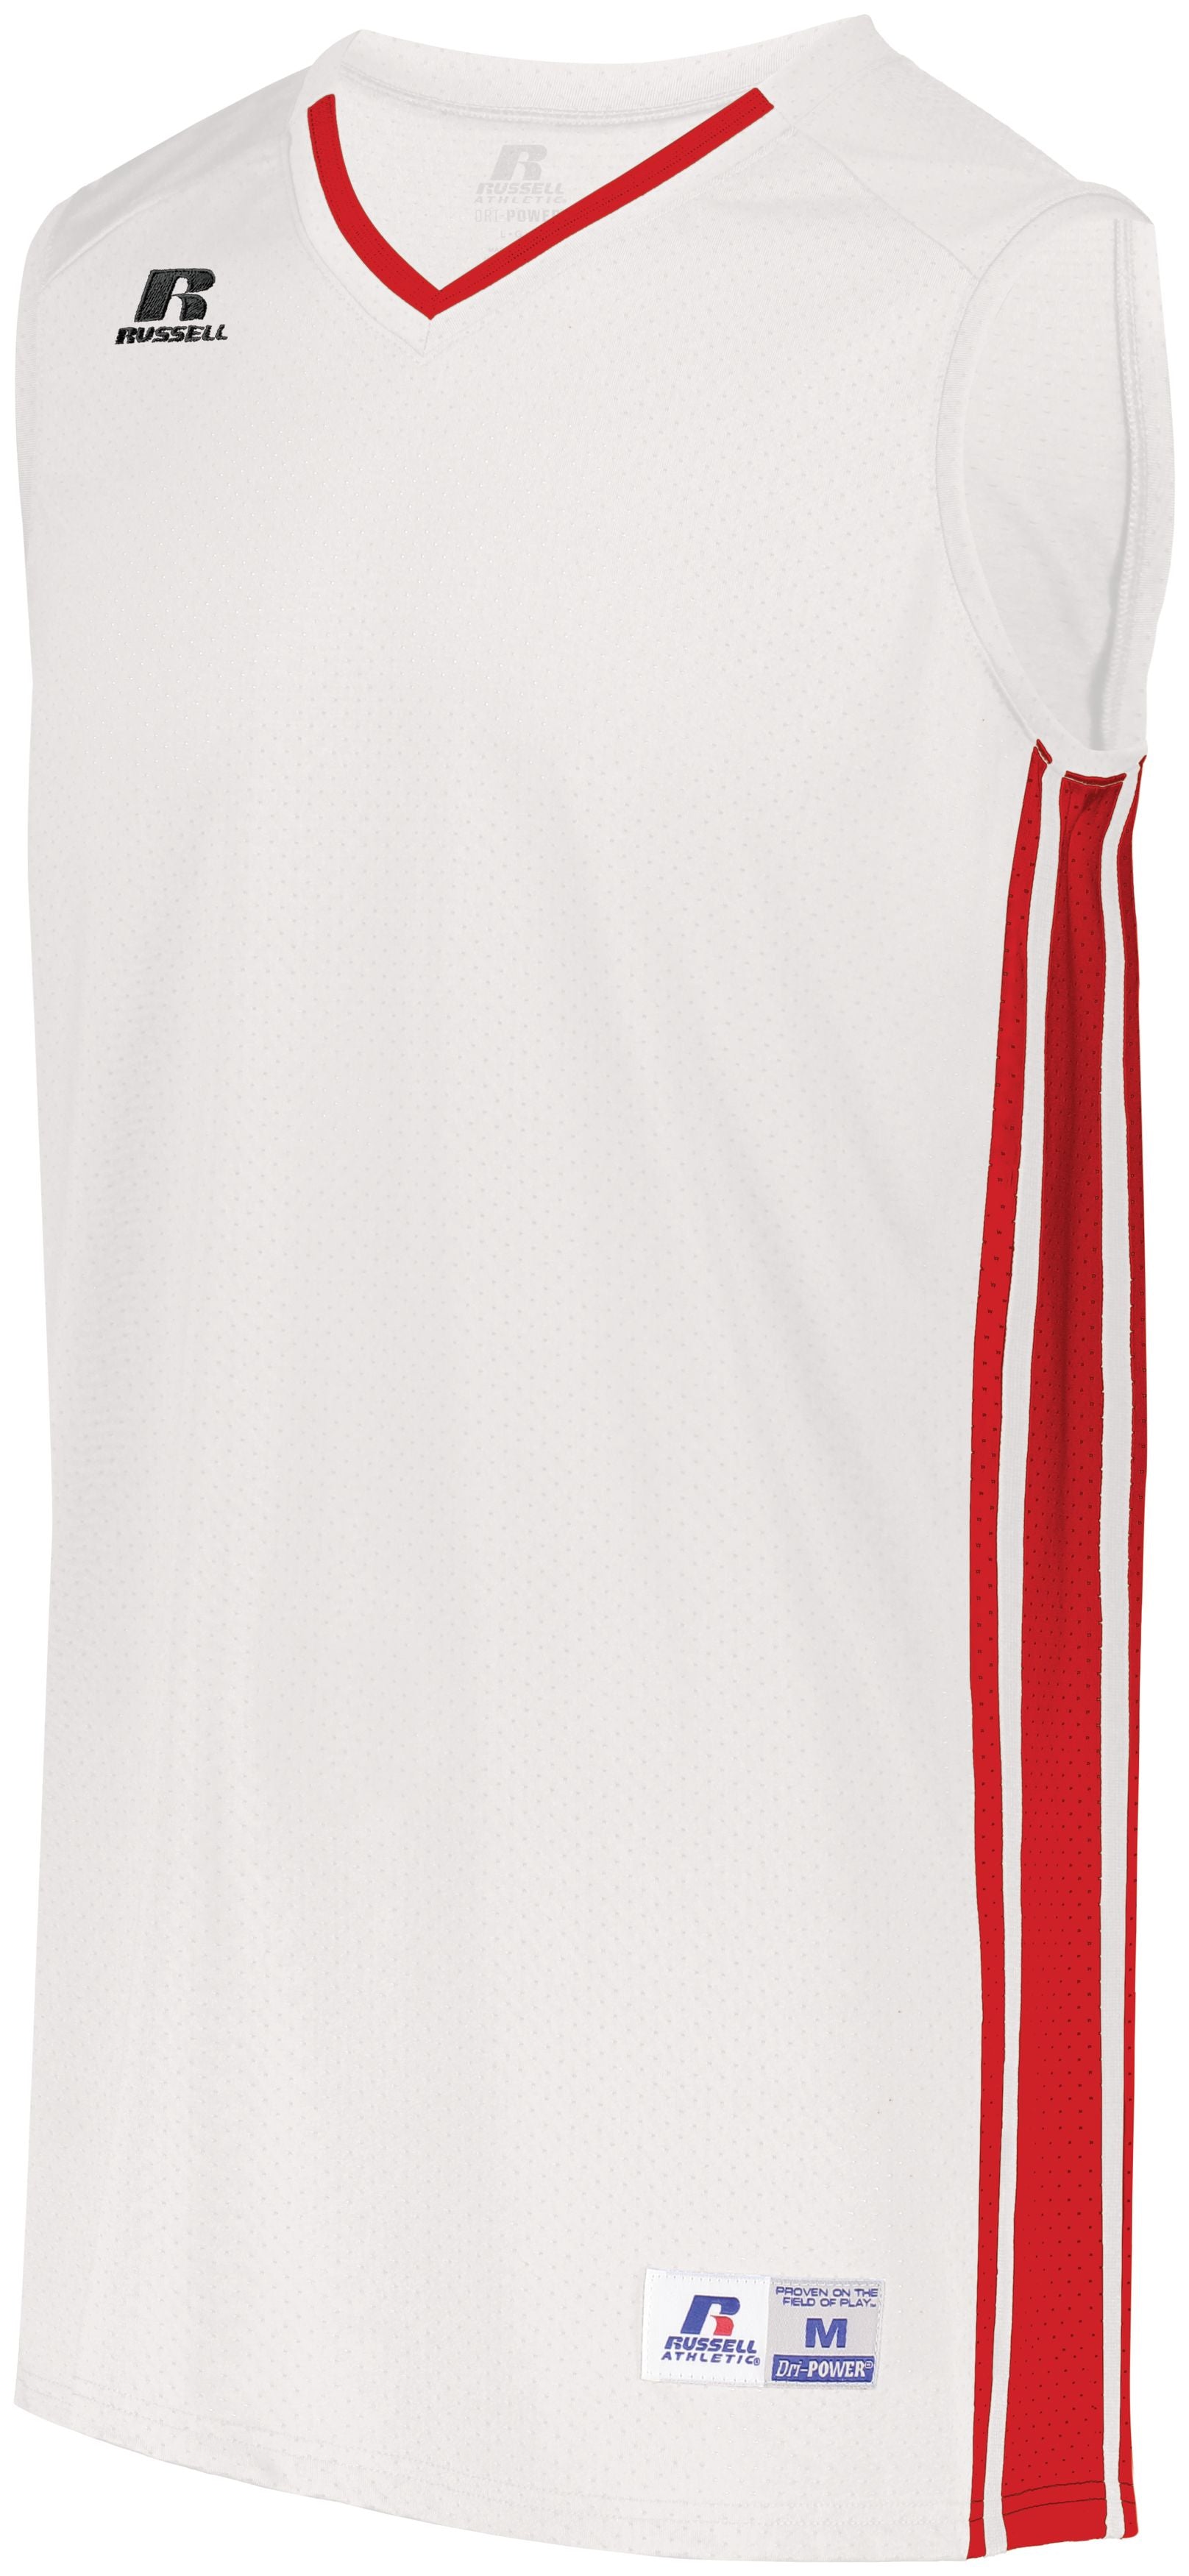 Russell Athletic Legacy Basketball Jersey in White/True Red  -Part of the Adult, Adult-Jersey, Basketball, Russell-Athletic-Products, Shirts, All-Sports, All-Sports-1 product lines at KanaleyCreations.com